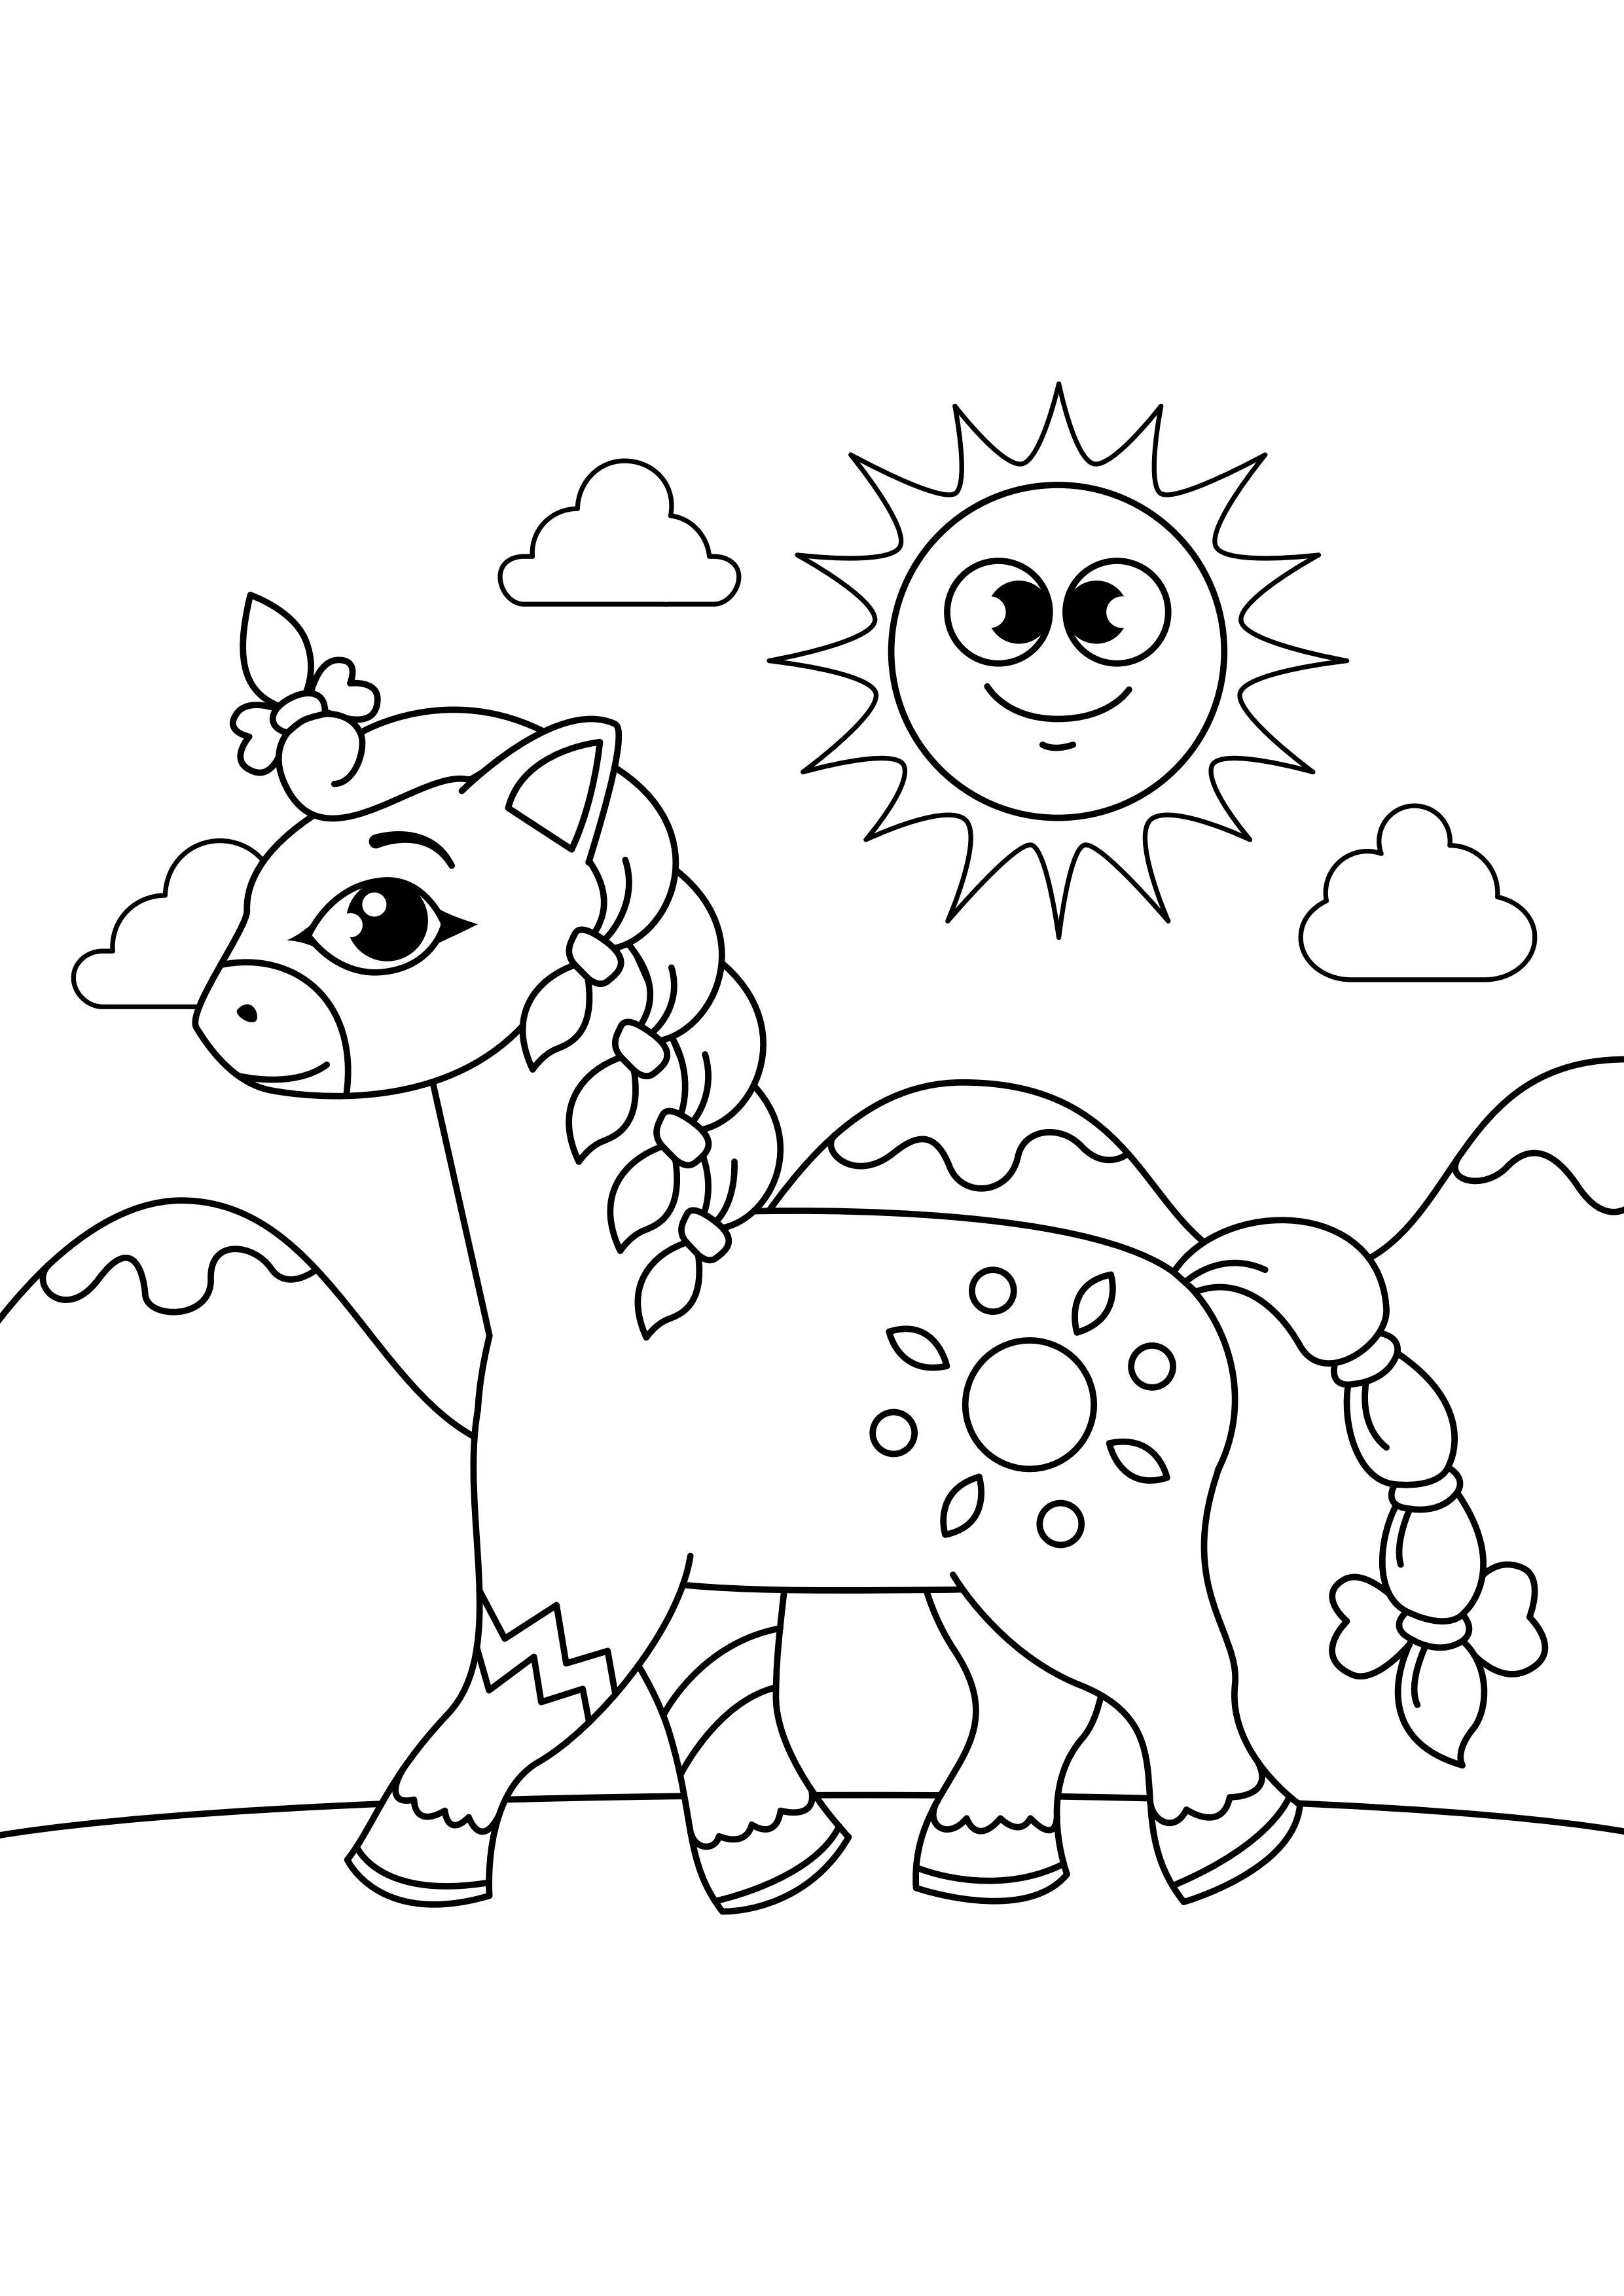 Coloring page horse with braids